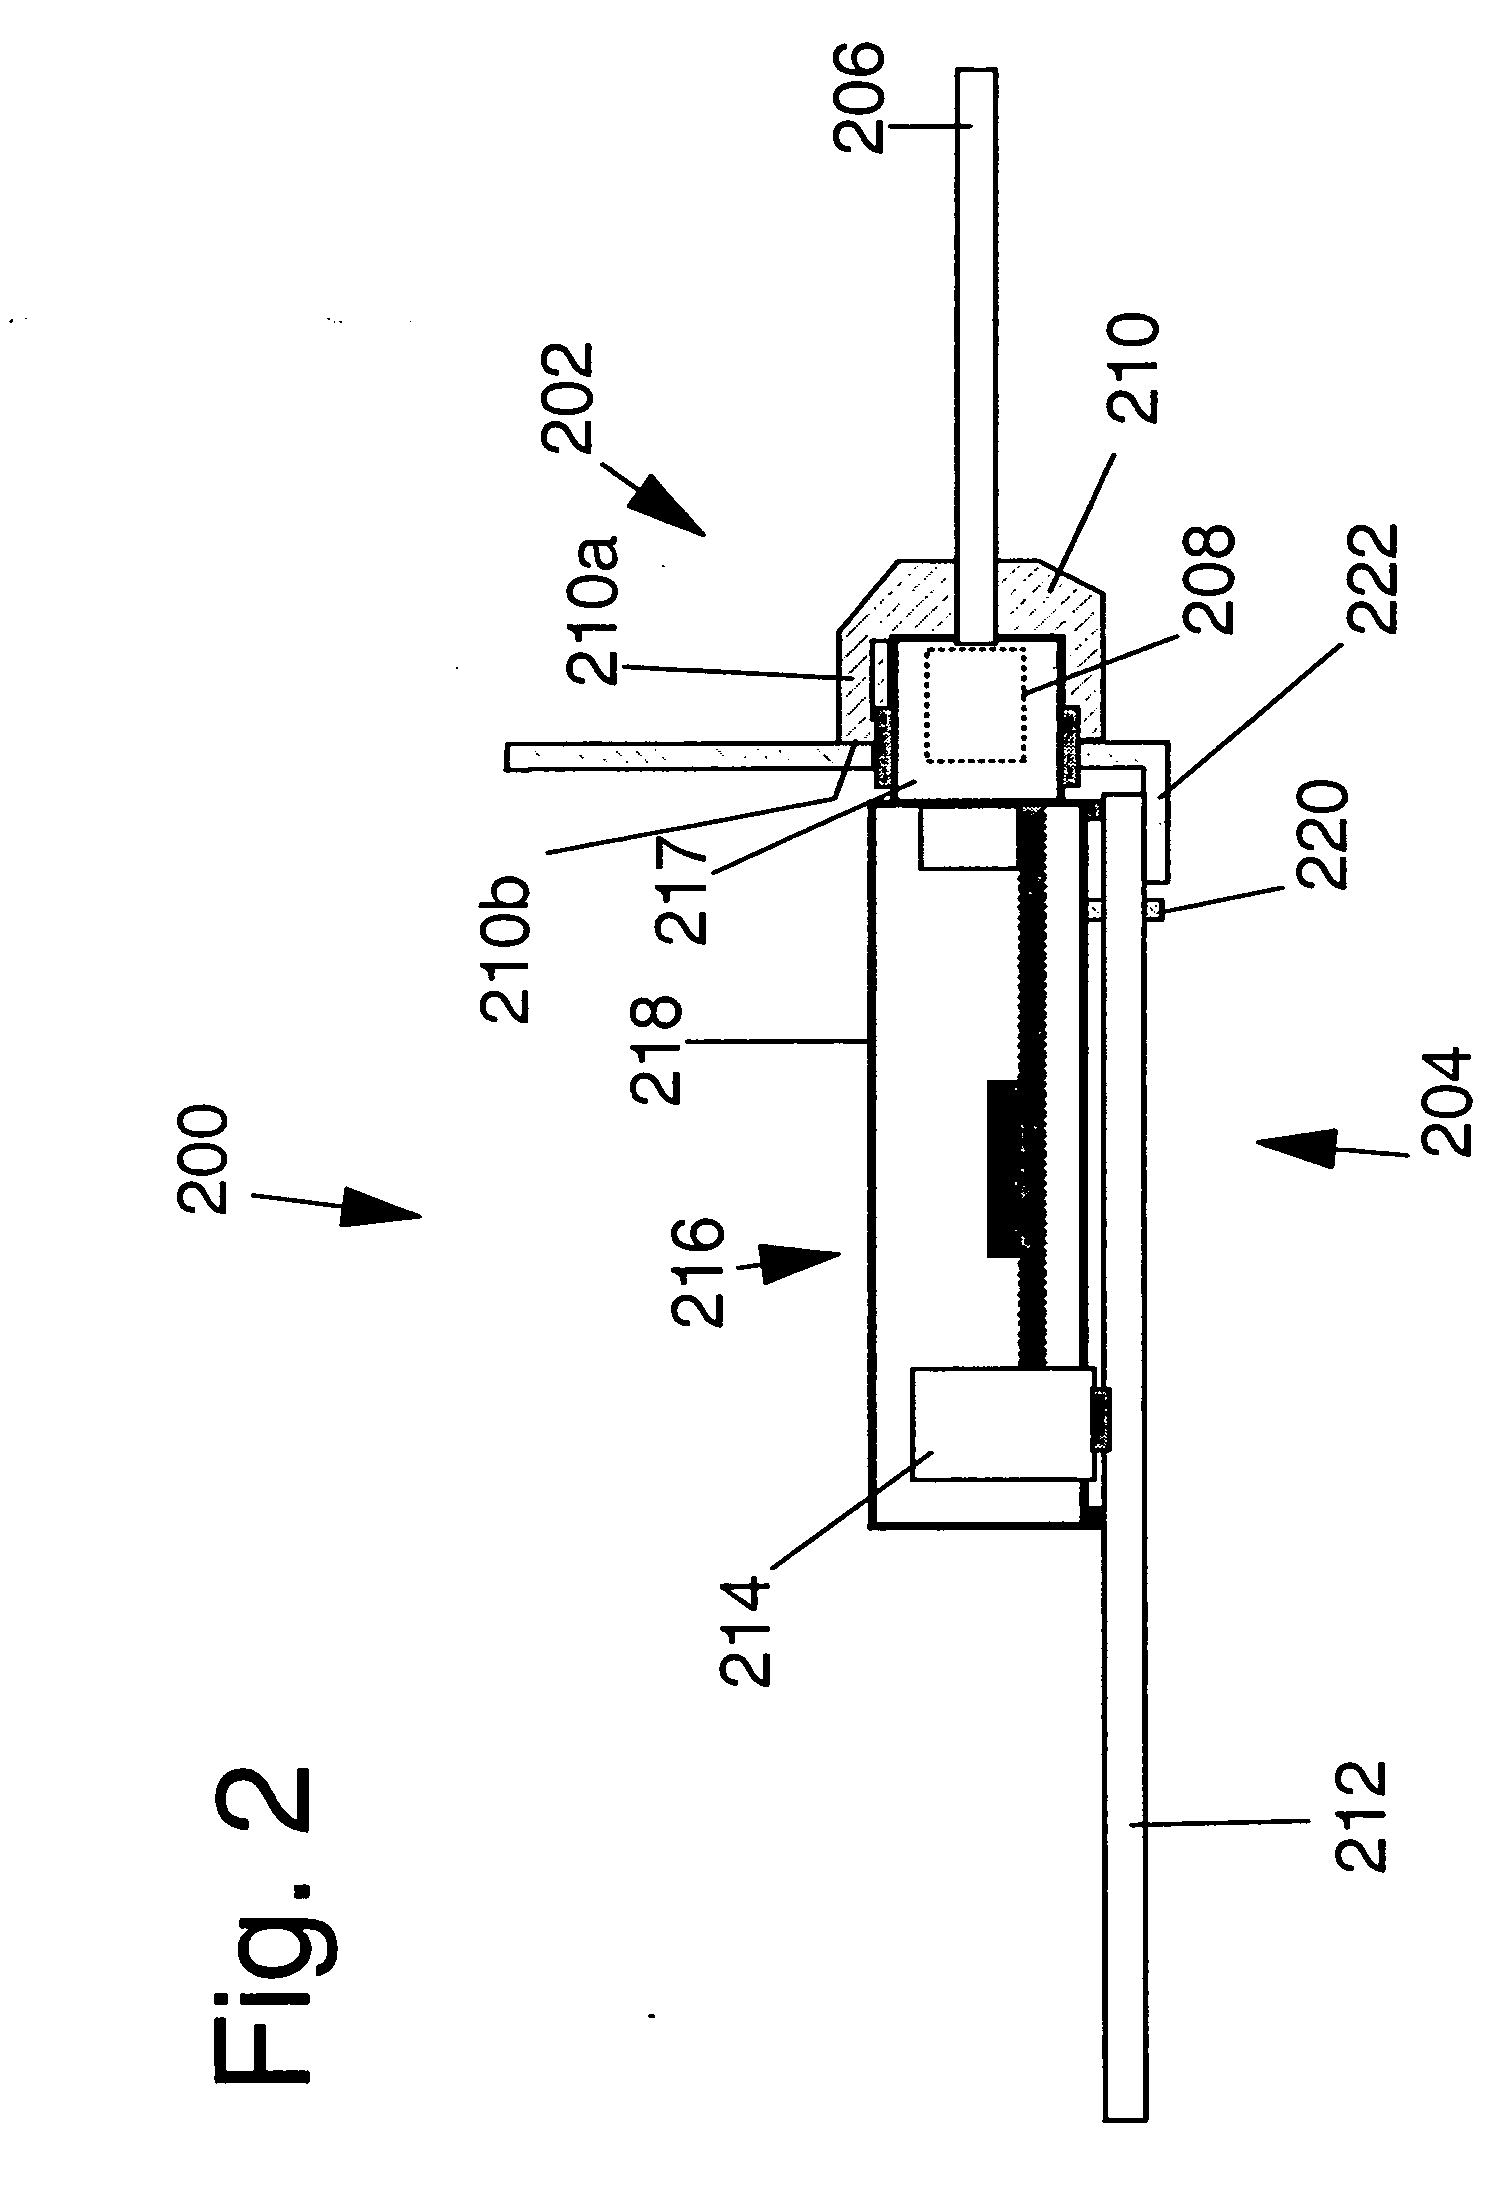 Connector assembly with integrated electromagnetic shield